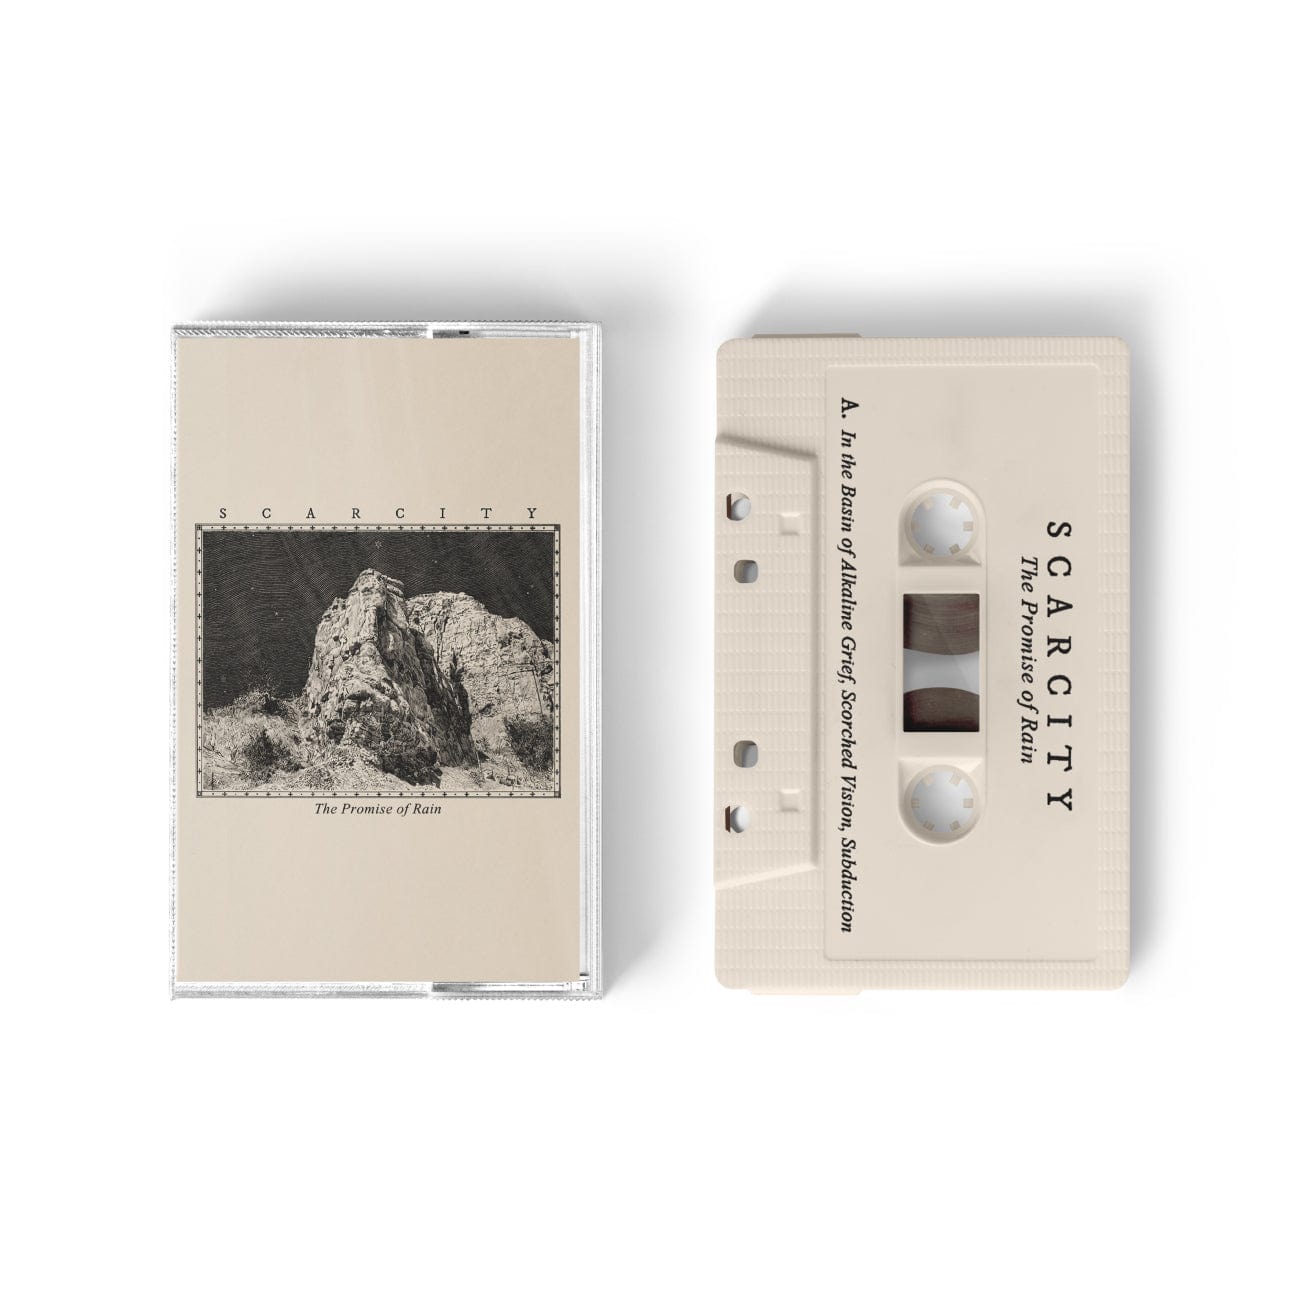 The Flenser Tapes Scarcity "The Promise of Rain" Tape (pre-order)